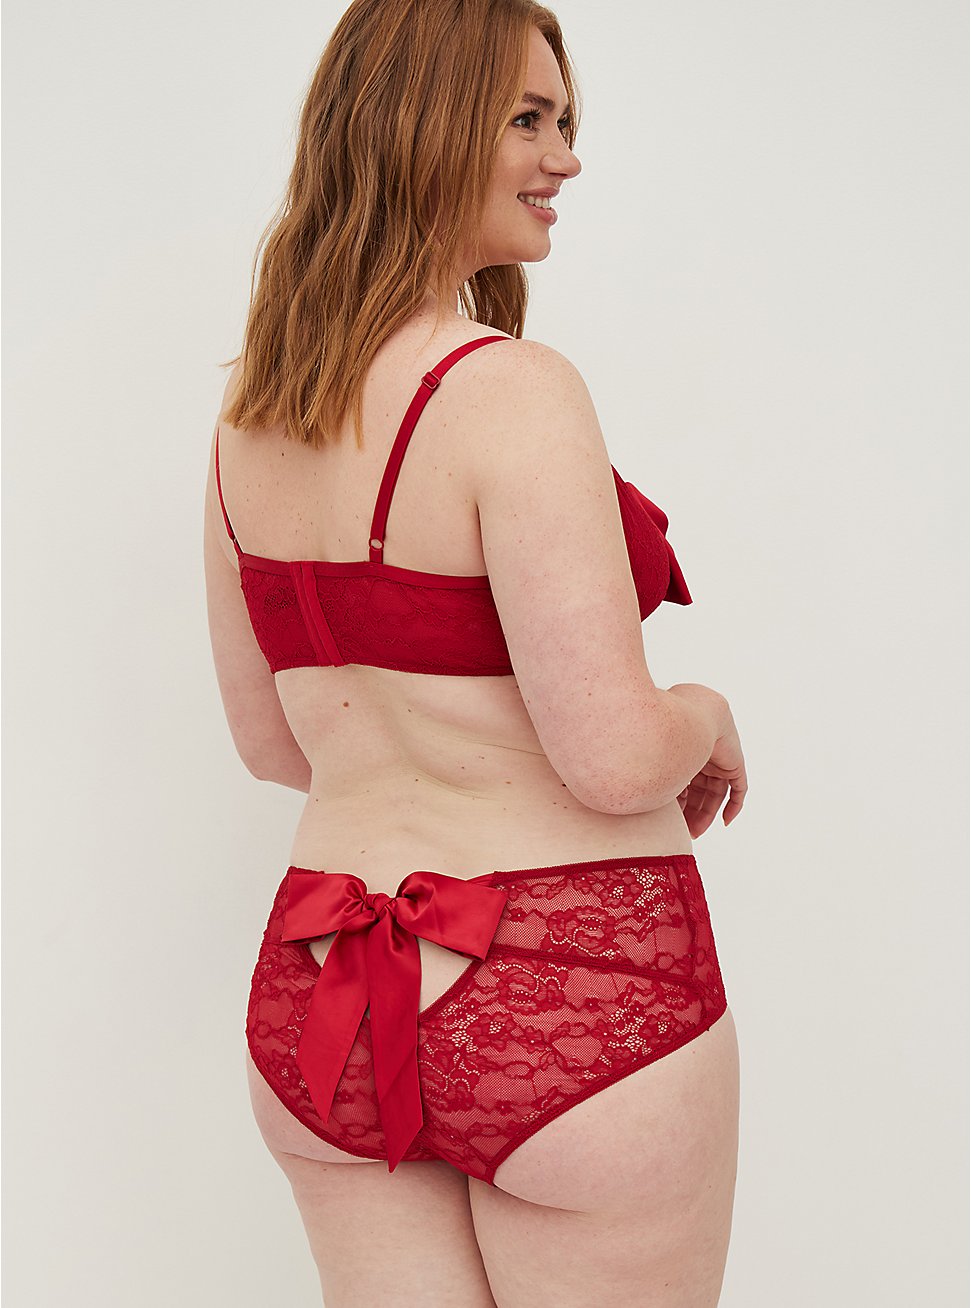 Plus Size Open Back Cheeky Panty - Satin & Lace Bow Red, JESTER RED, hi-res